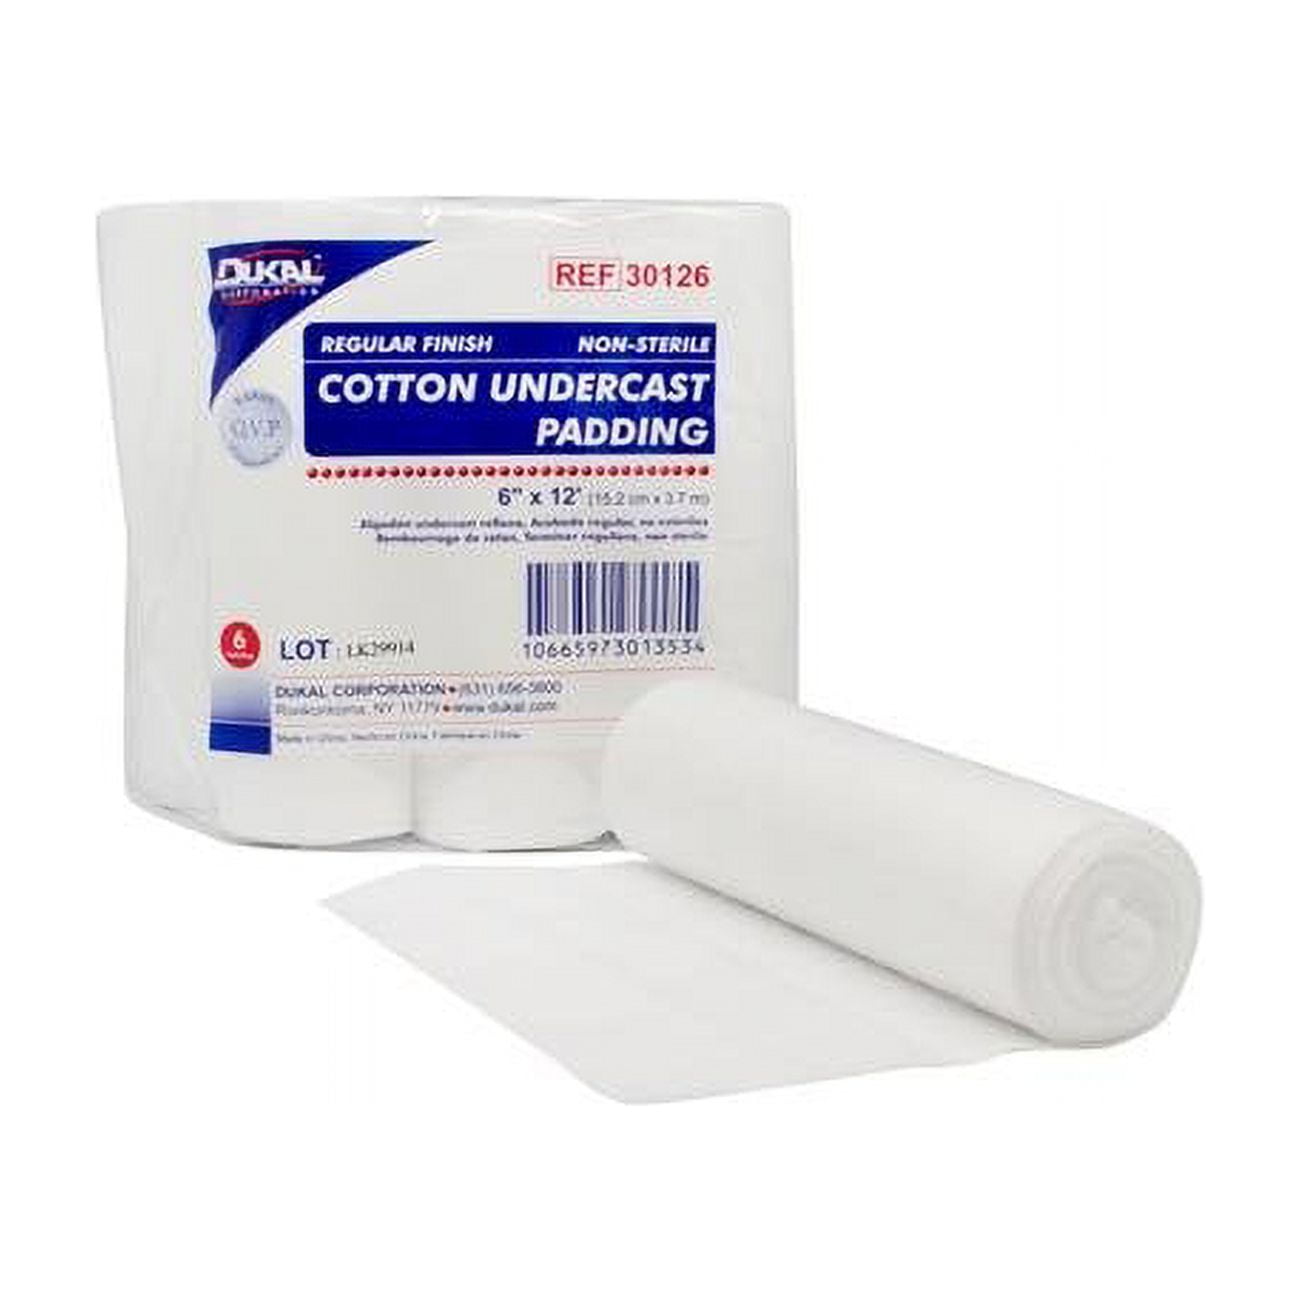 Picture of Dukal 30126 6 in. x 4 yards Cotton Undercast Padding, Regular